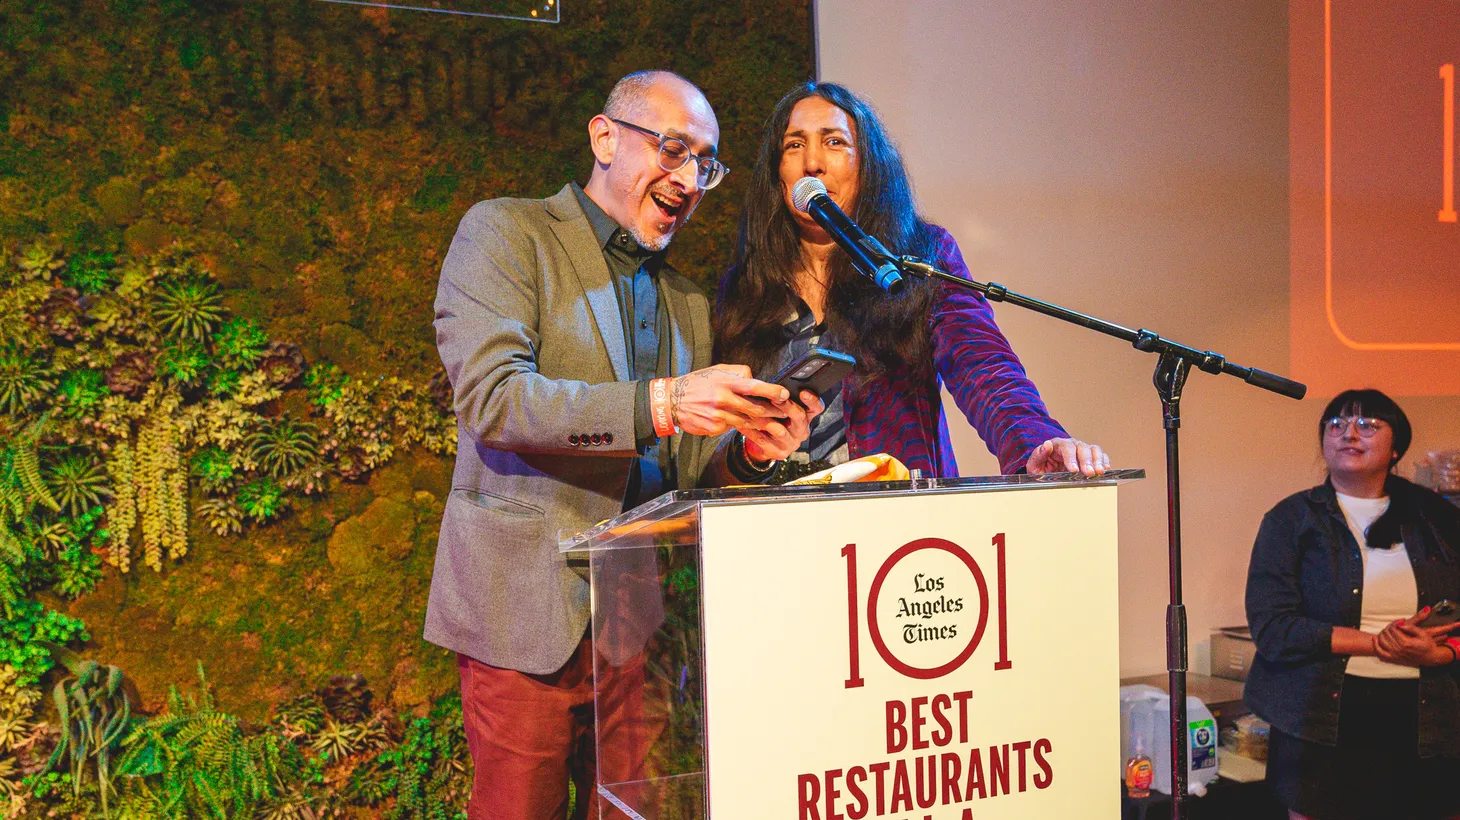 Remaining anonymous, Bill Addison leaves the roll call for his 101 Best Restaurants to LA Times Food Editor Daniel Hernandez and General Manager of Food Laurie Ochoa.